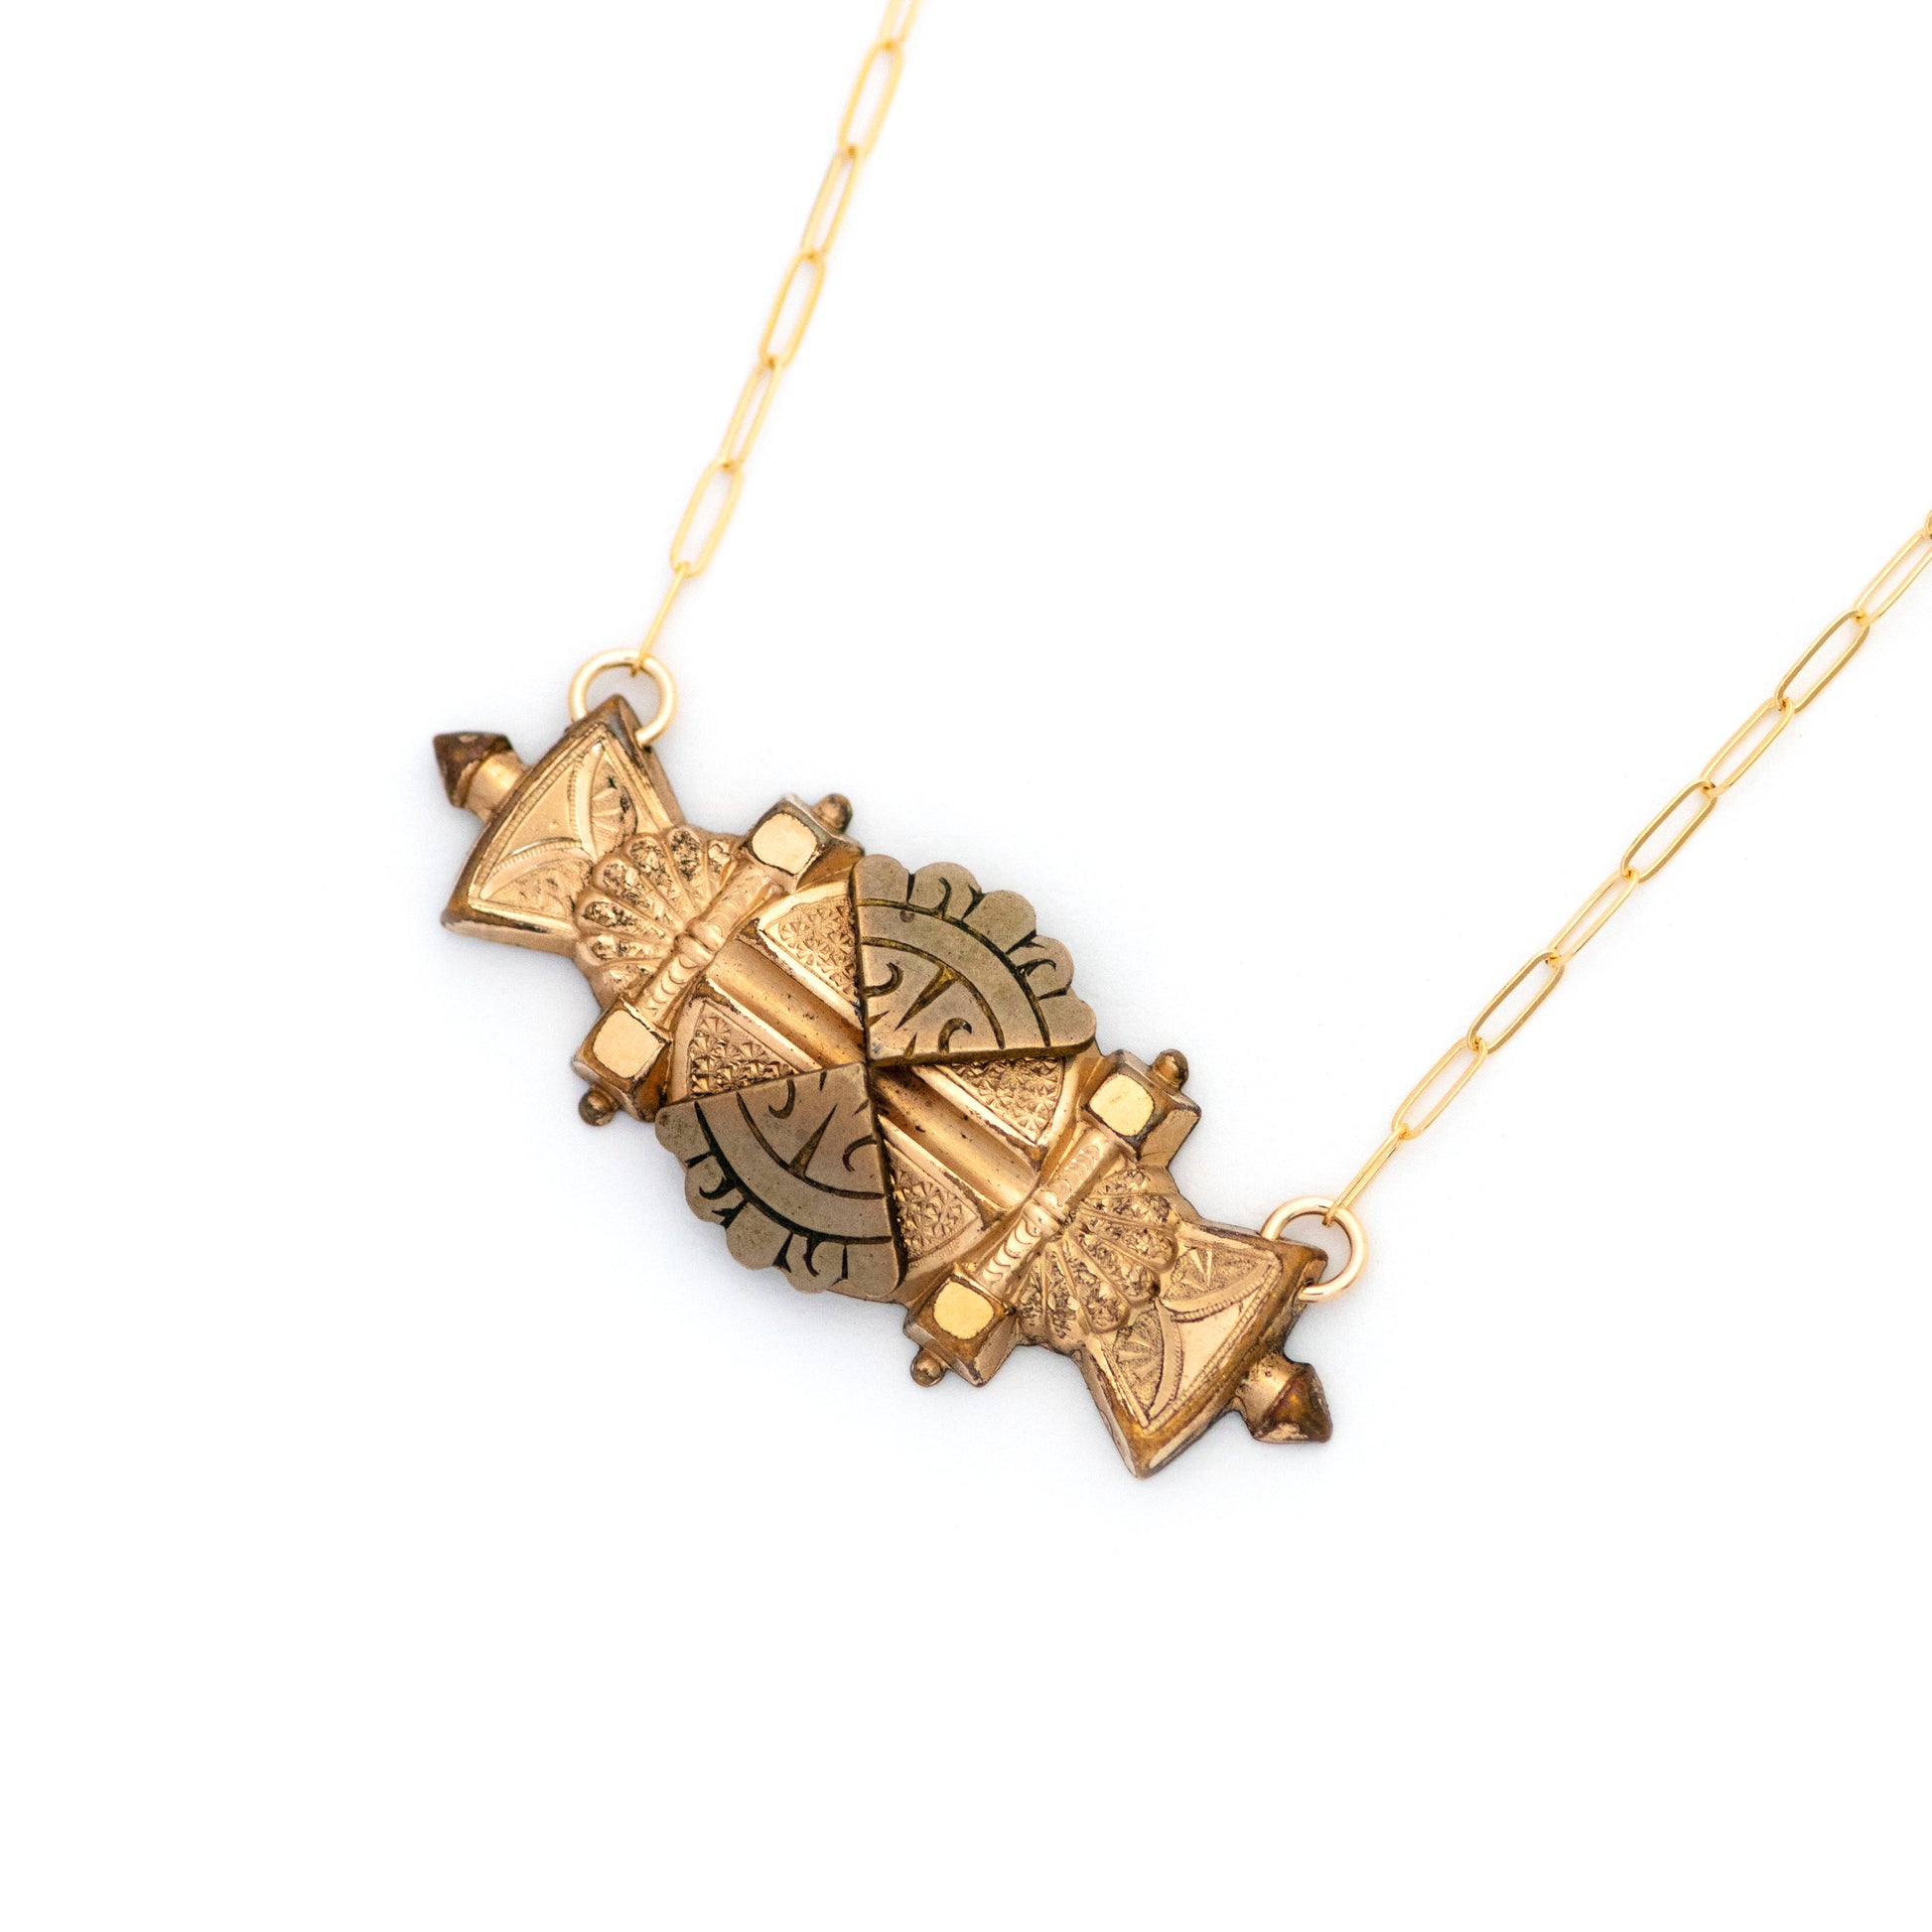 Gold filled Edwardian bar pin pendant from the early 1900s with hand engraved details. 